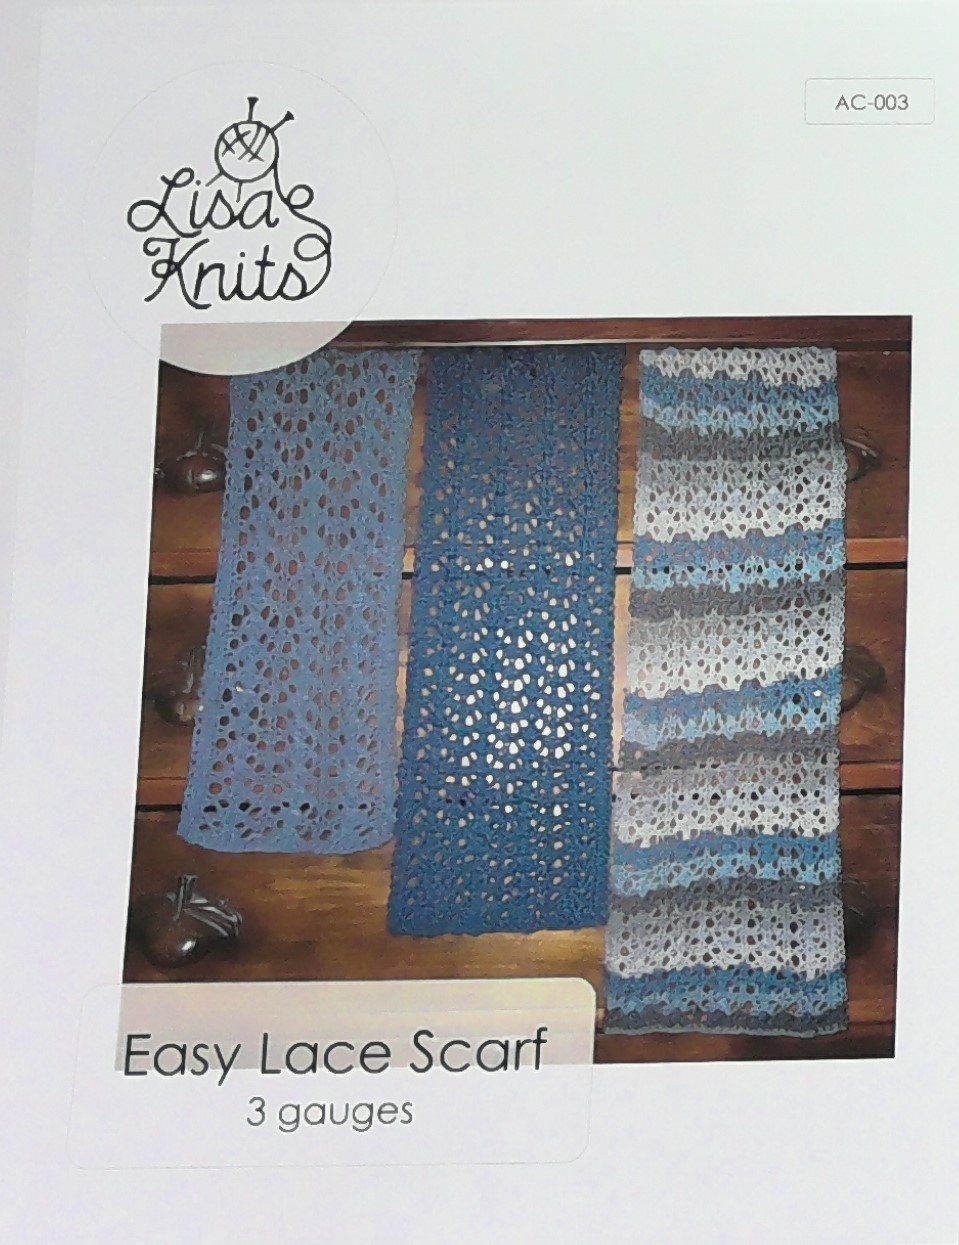 Lisa Knits Patterns  Easy Lace Scarf